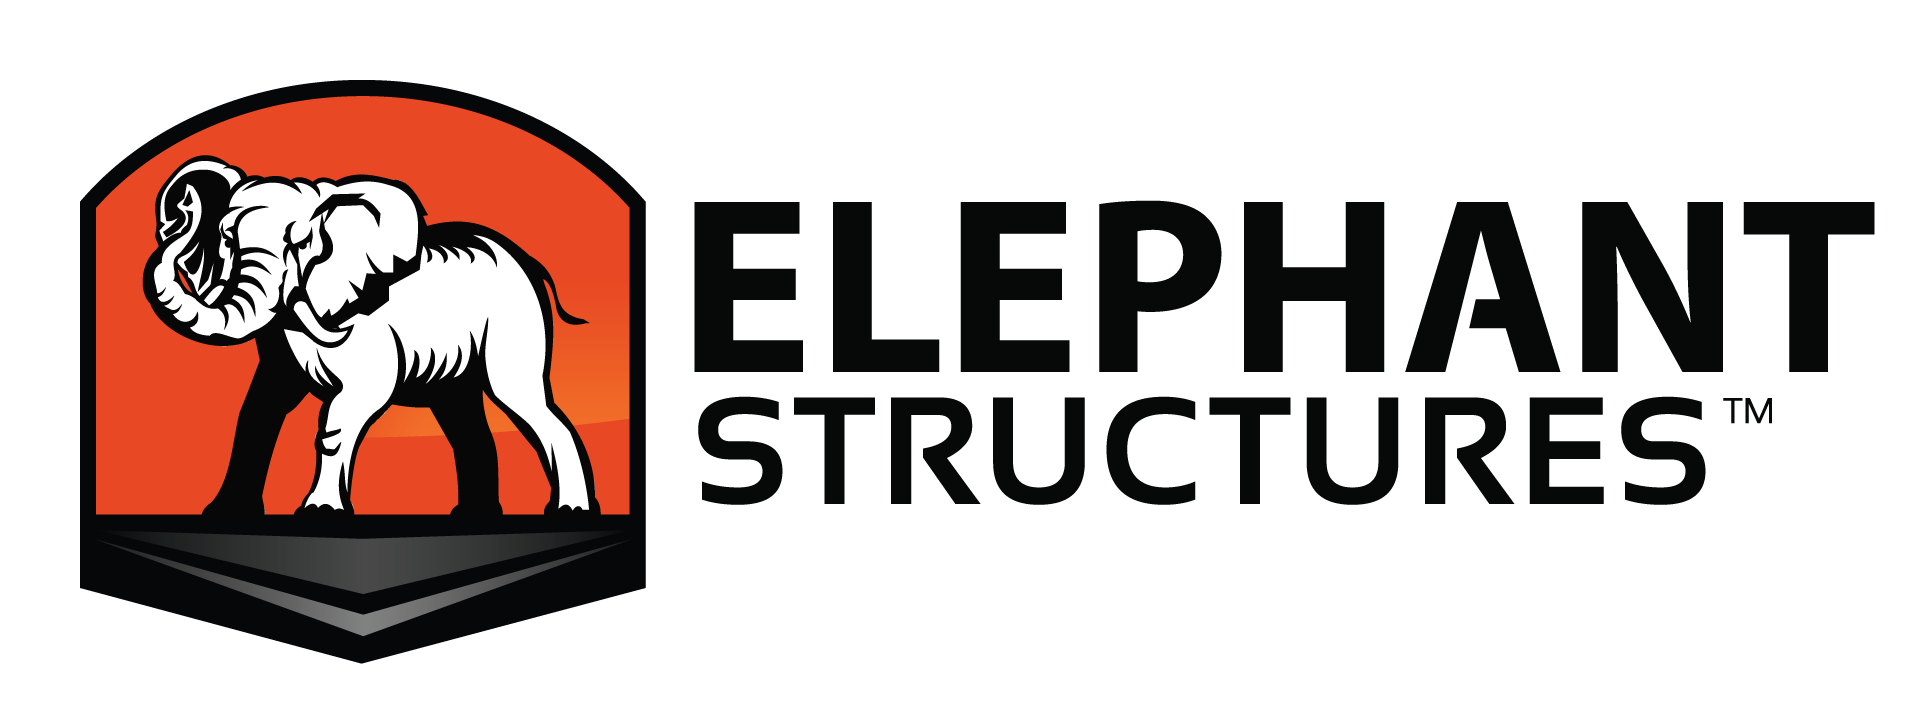 Elephant Structures logo - horizontal icon and text